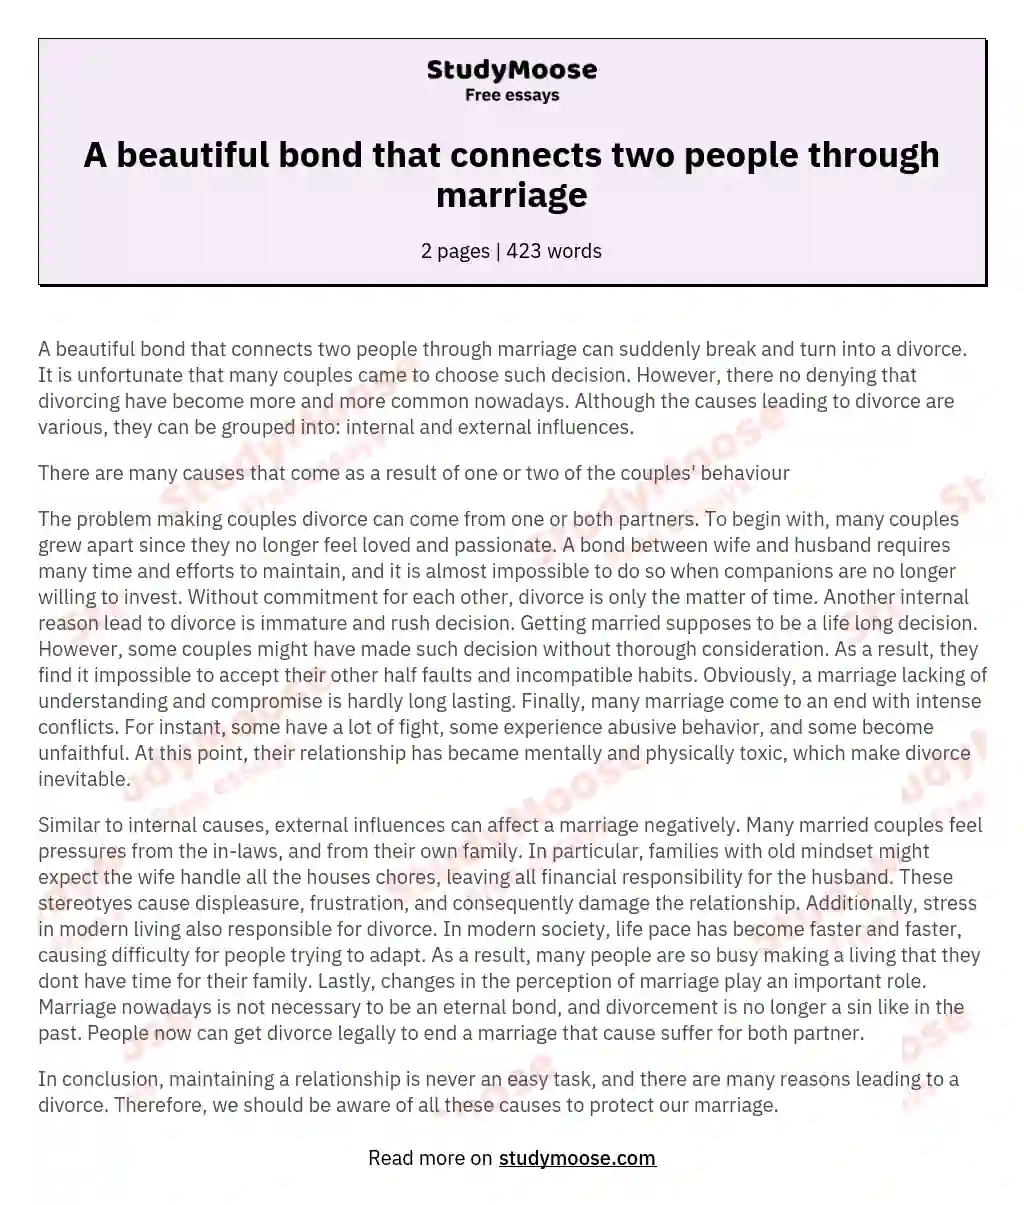 A beautiful bond that connects two people through marriage essay